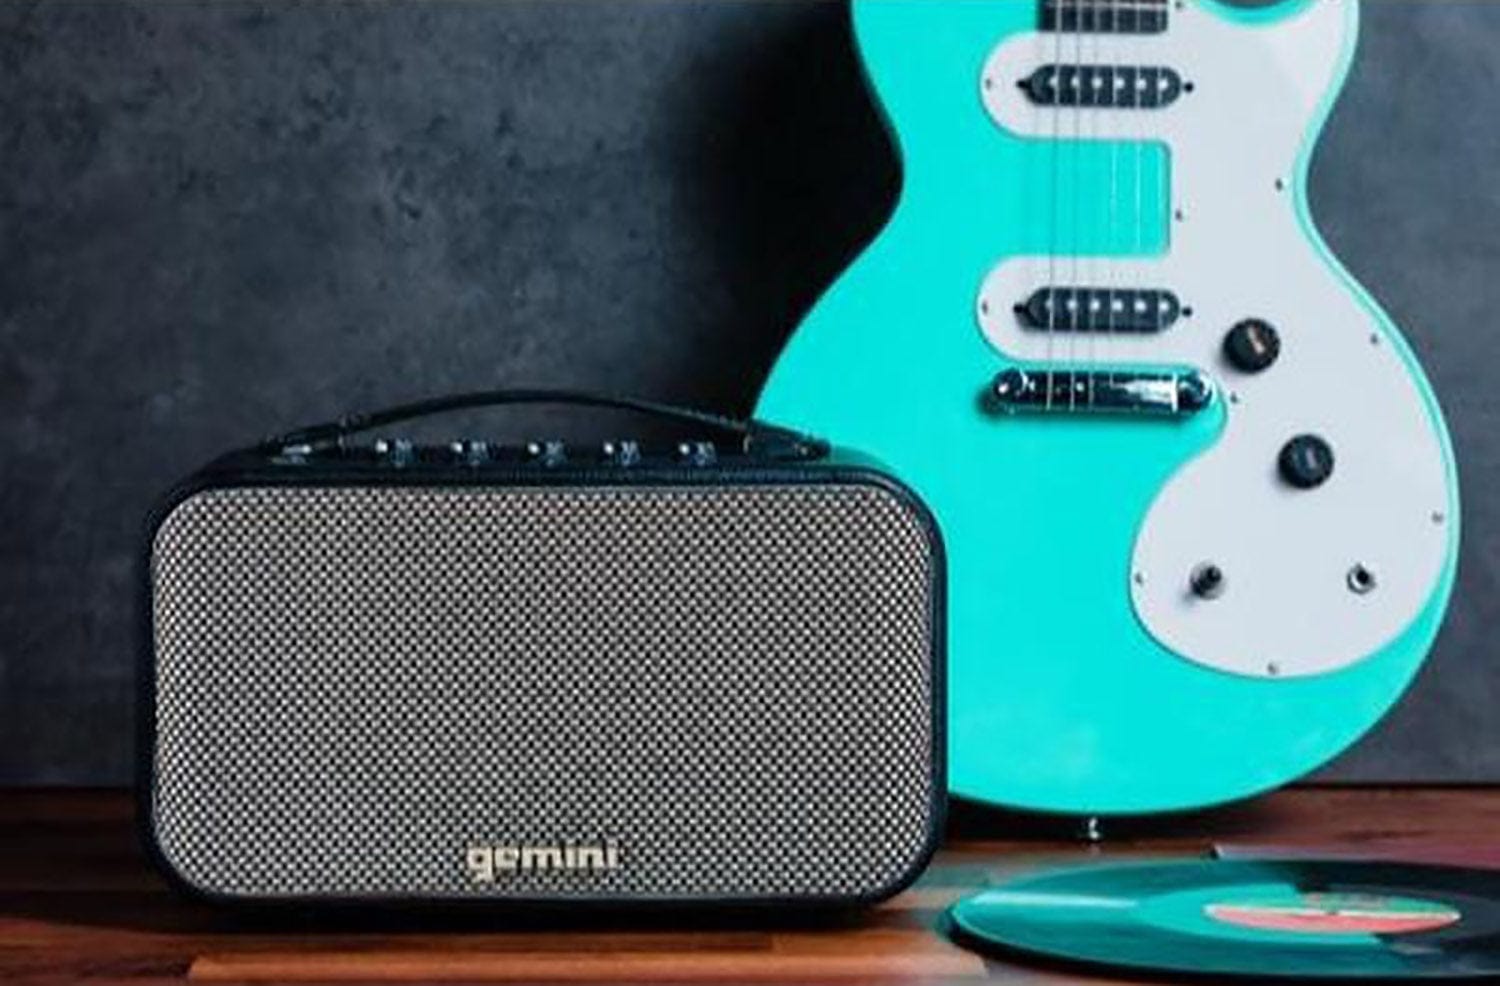 Gemini GTR-300 Portable Bluetooth Stereo Speaker and Guitar Amp - PSSL ProSound and Stage Lighting